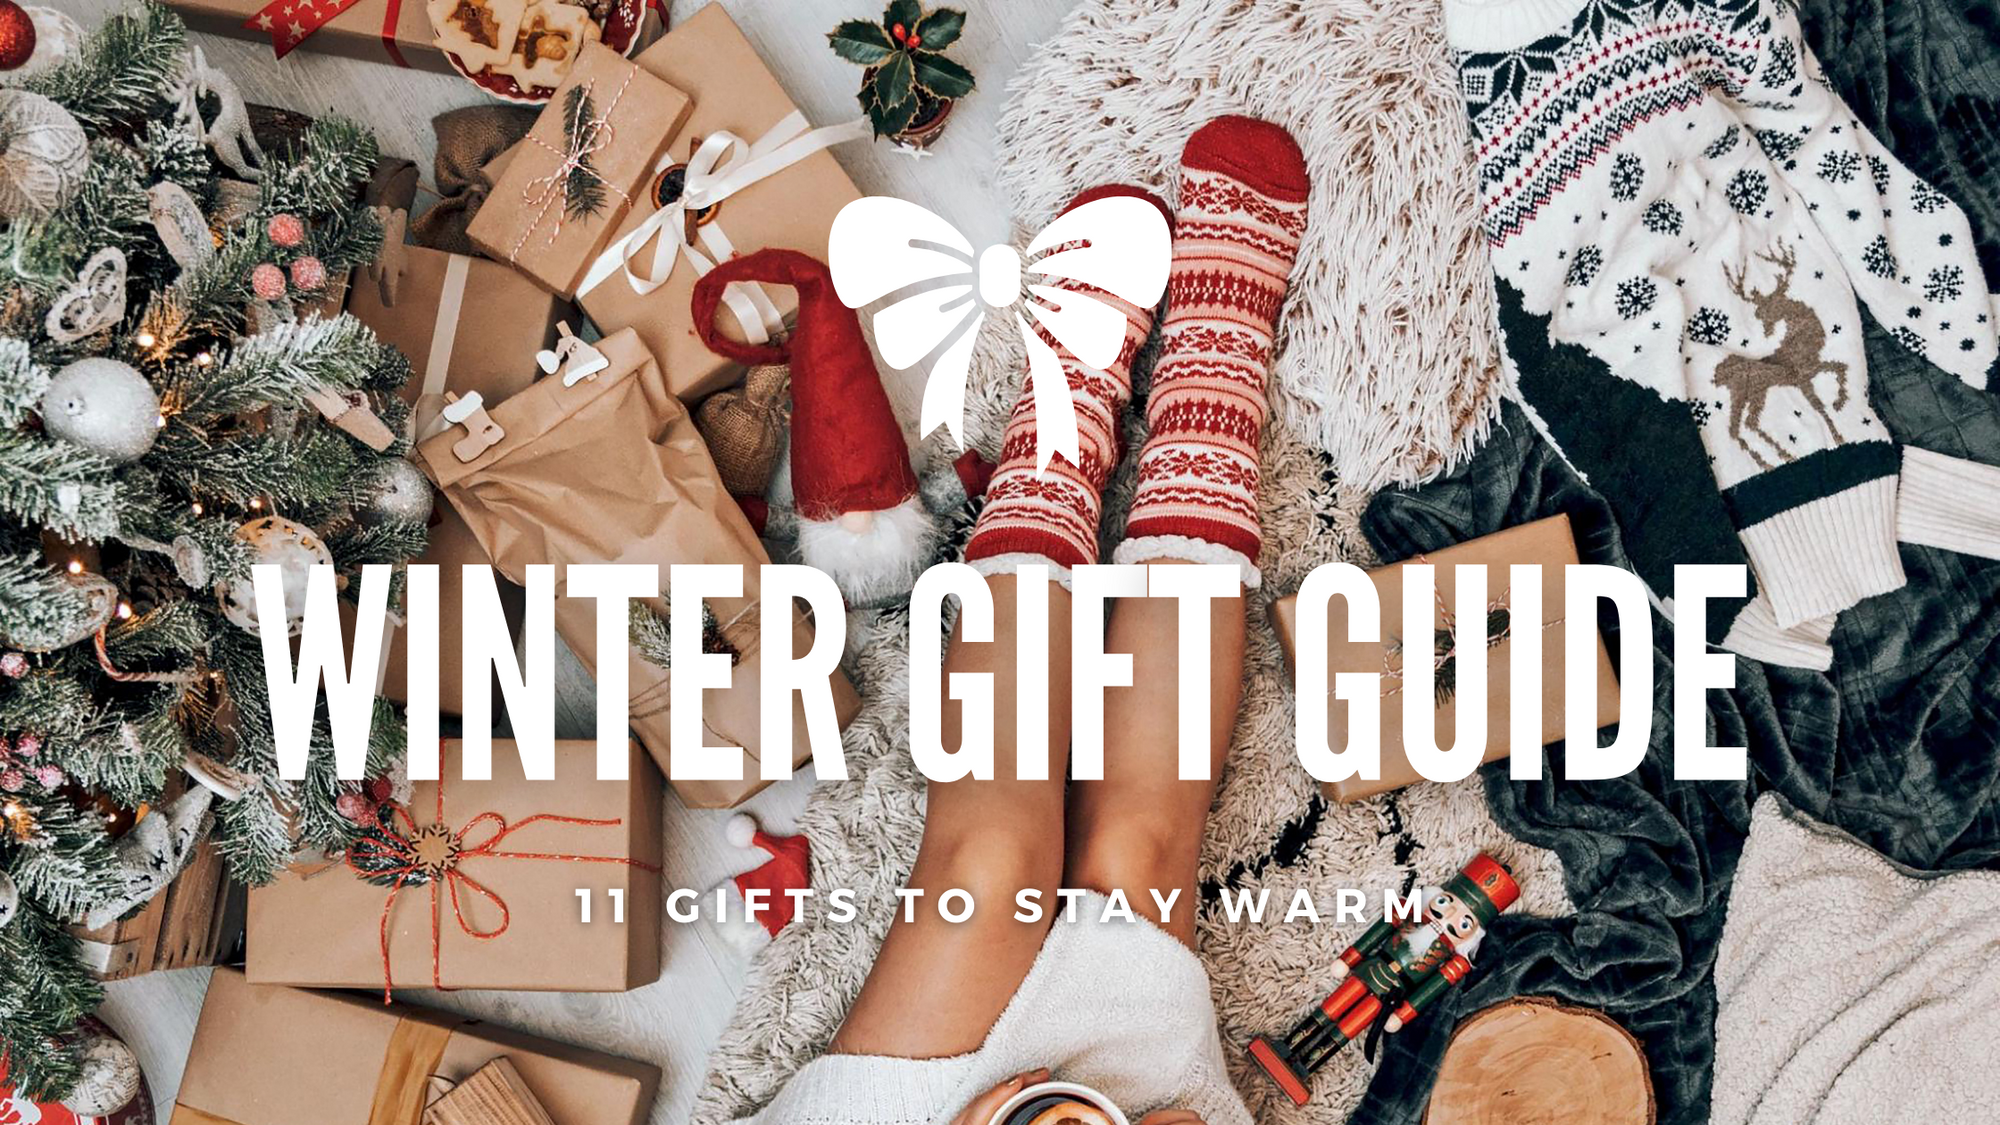 Christmas gift guide to keep your loved ones warm